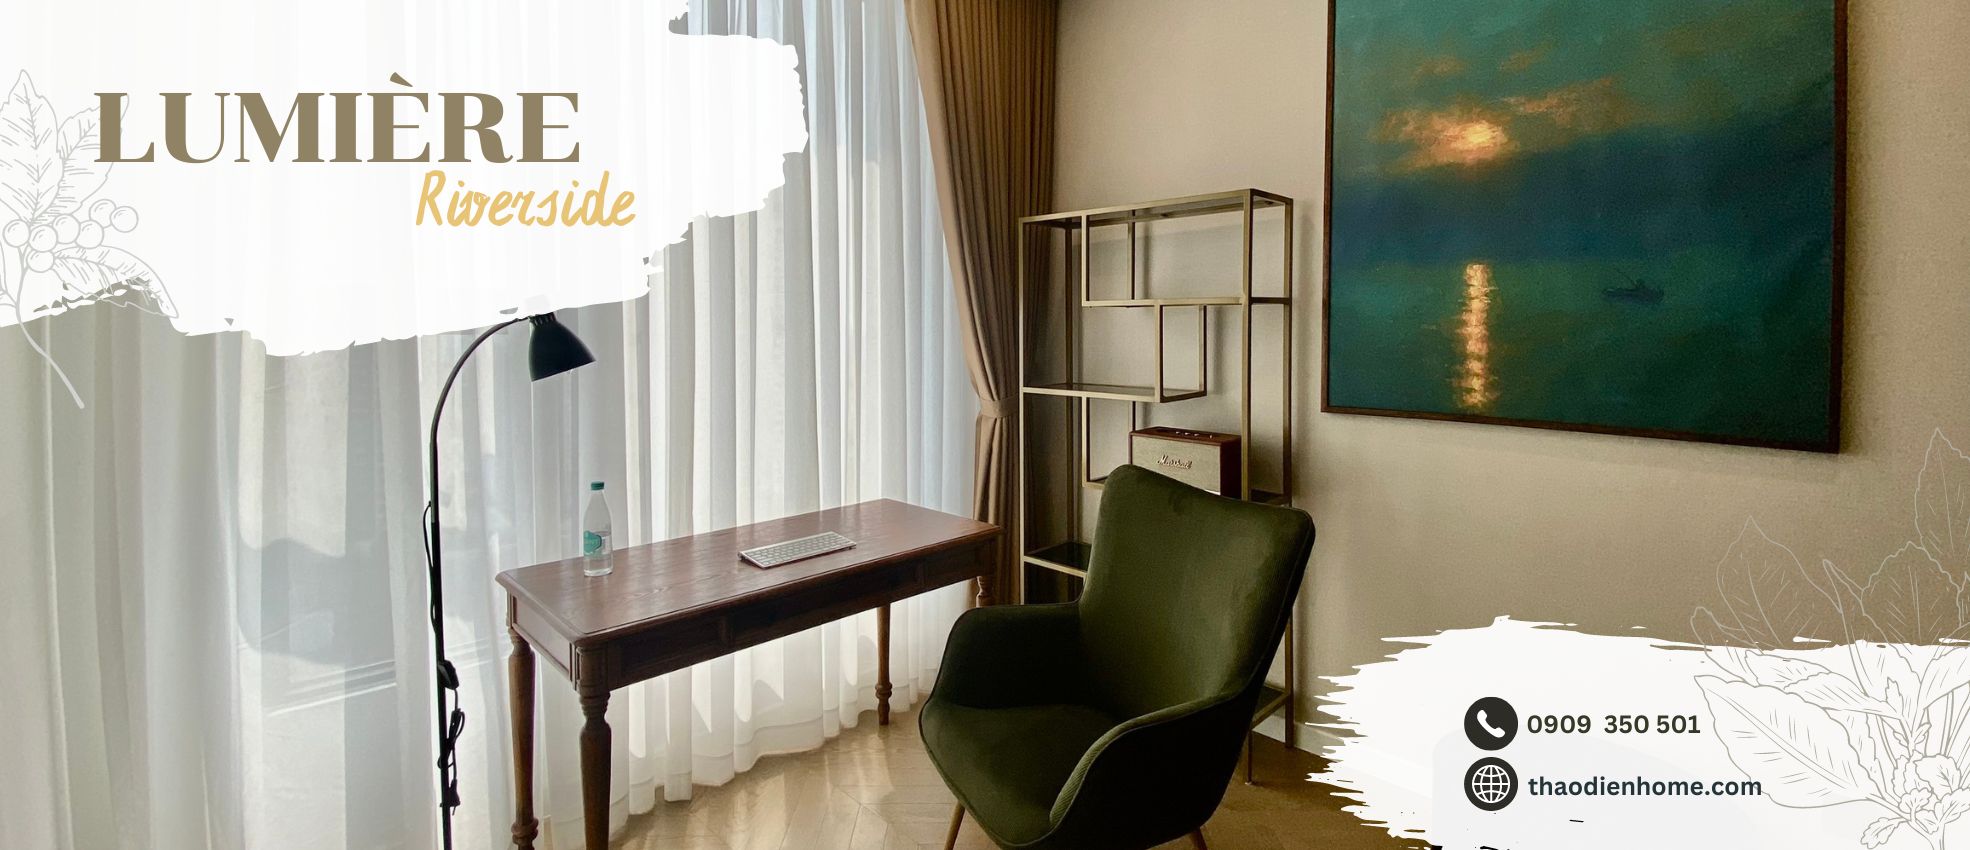 LU W22.03 Homepage - Luxurious 2-Bedroom Apartment in LUMIÈRE Riverside with a Quiet Work Space and Elegant Furniture